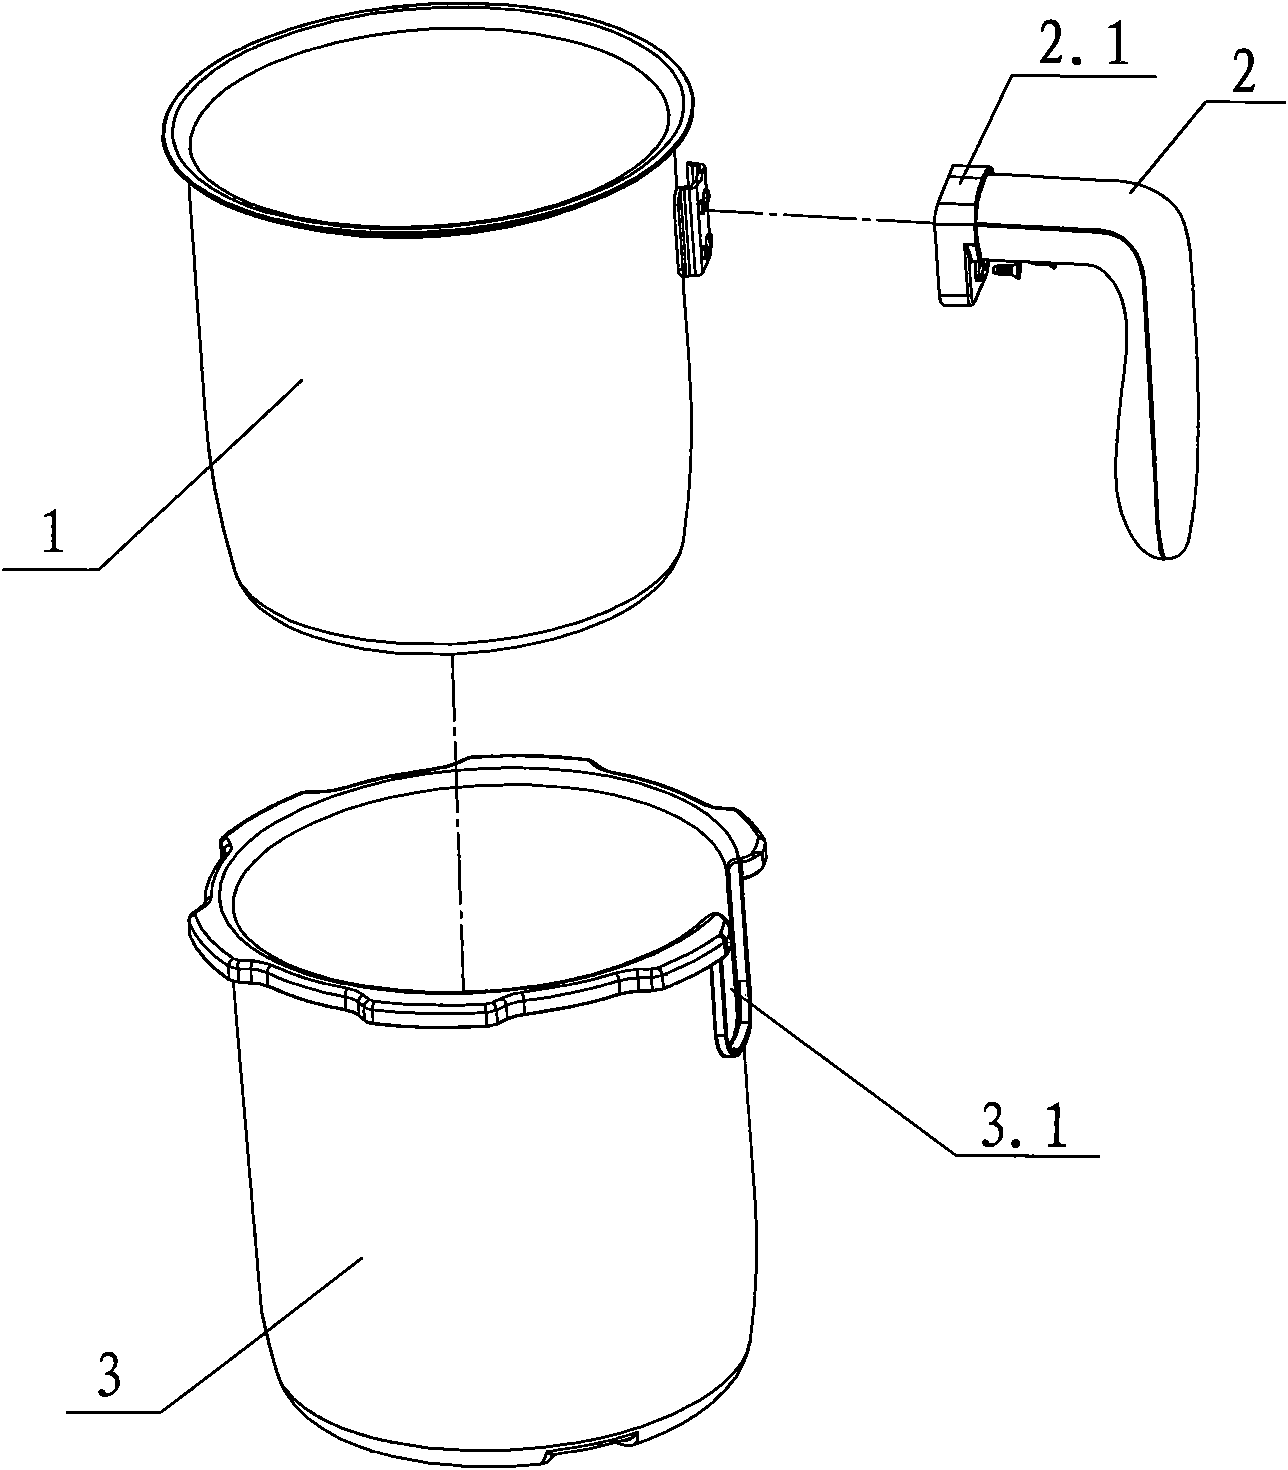 Electrical pressure cooking apparatus with internal pot with handle